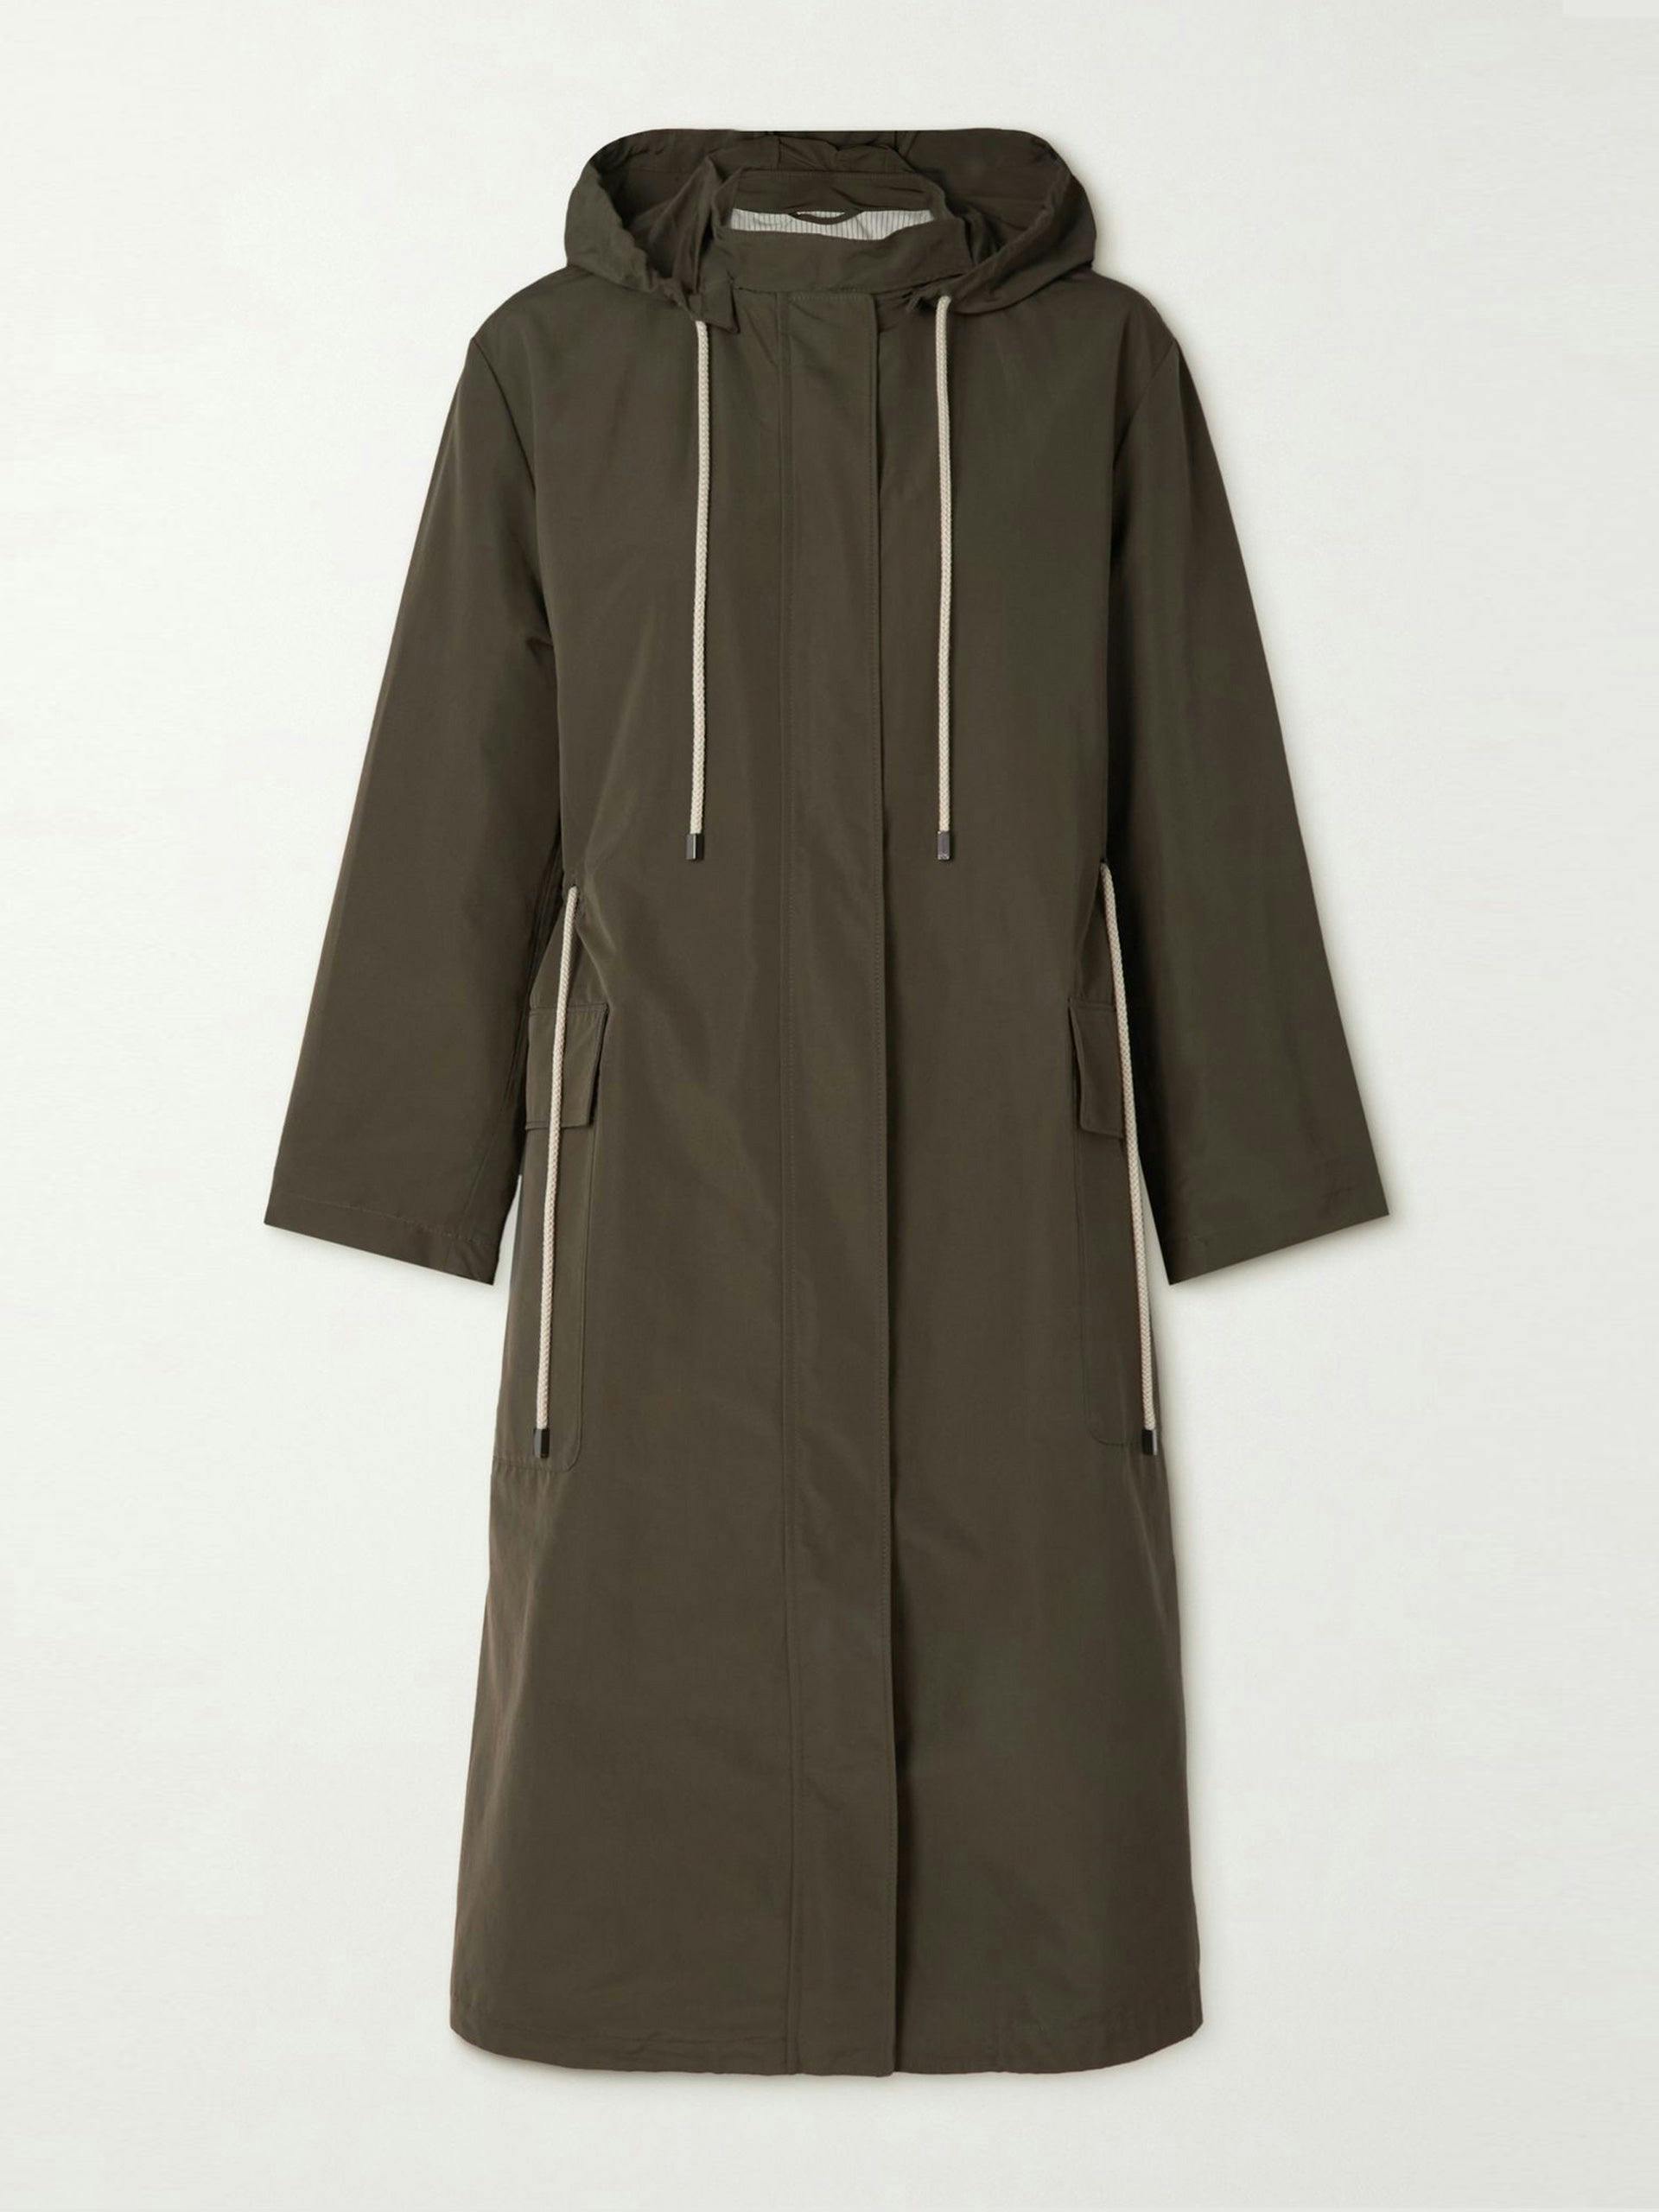 Army green hooded coat